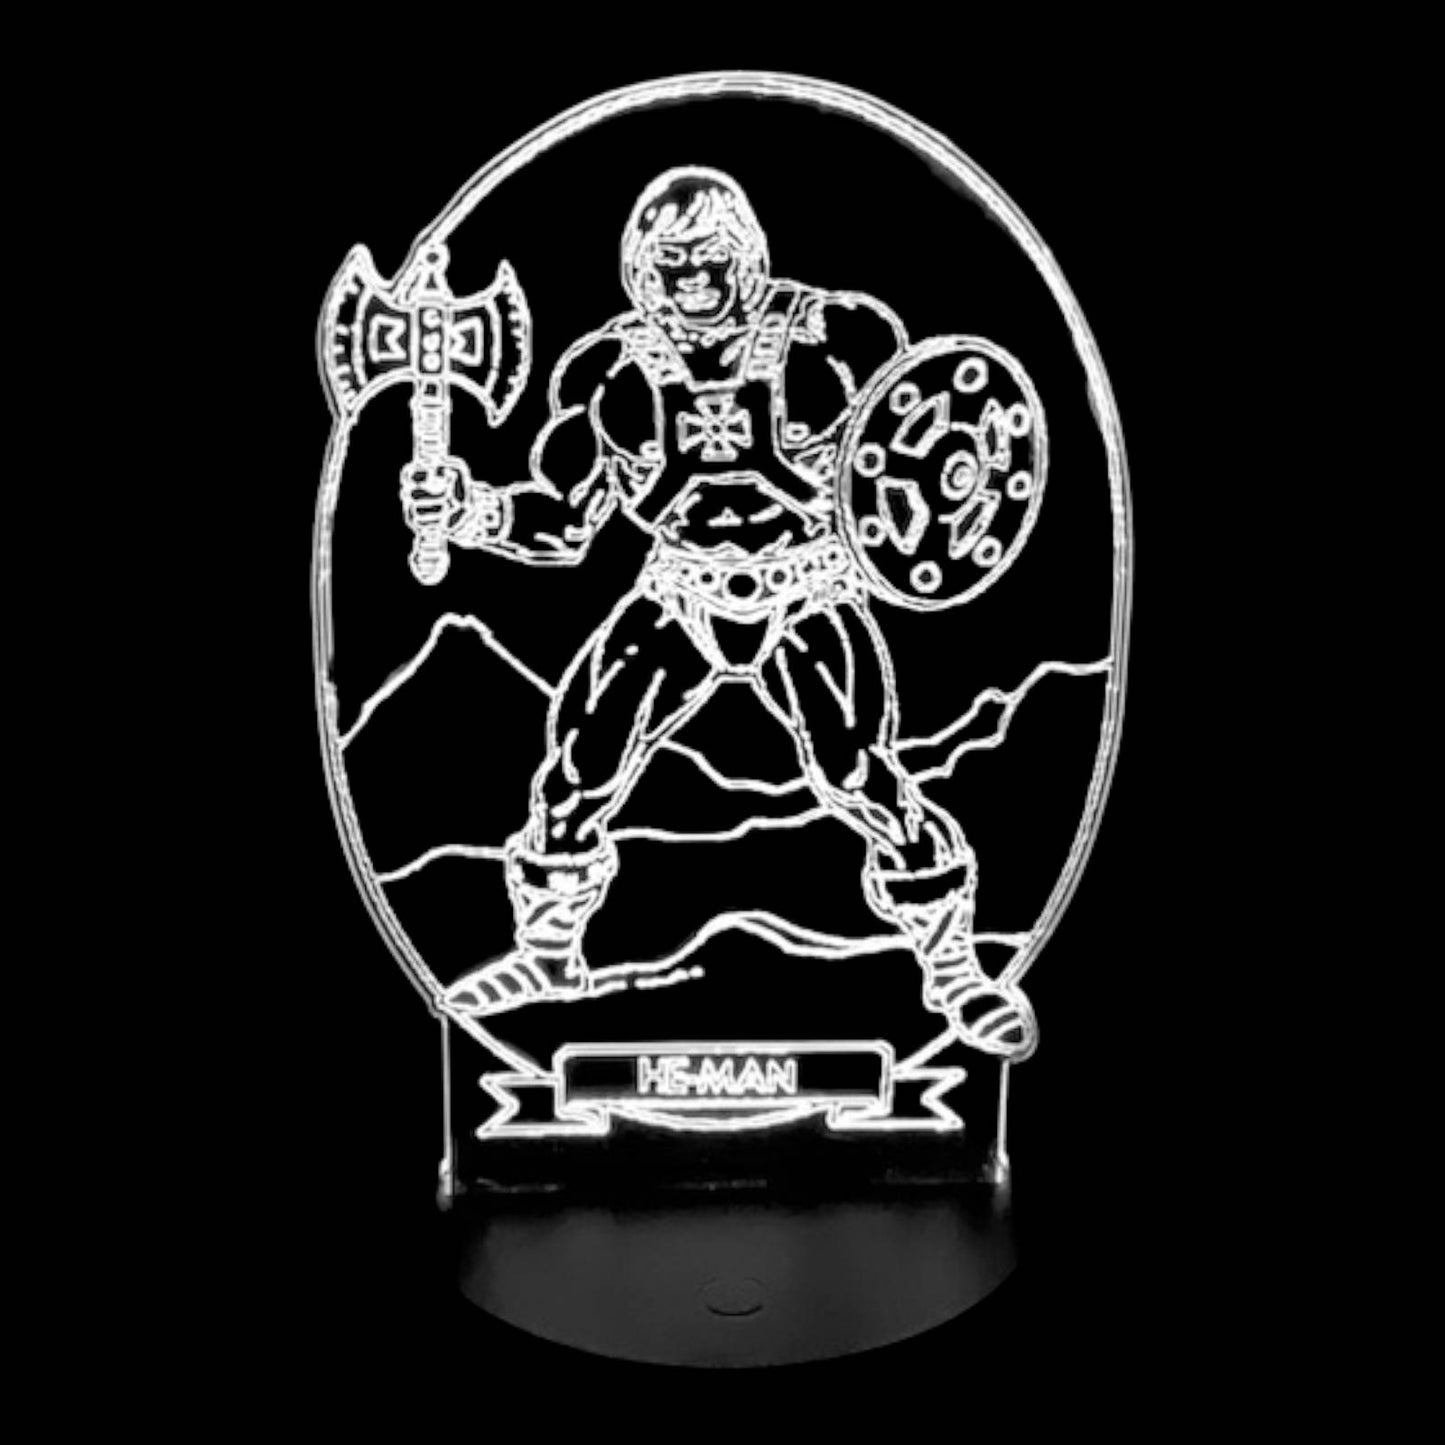 He-Man 3D LED Night-Light 7 Color Changing Lamp w/ Touch Switch